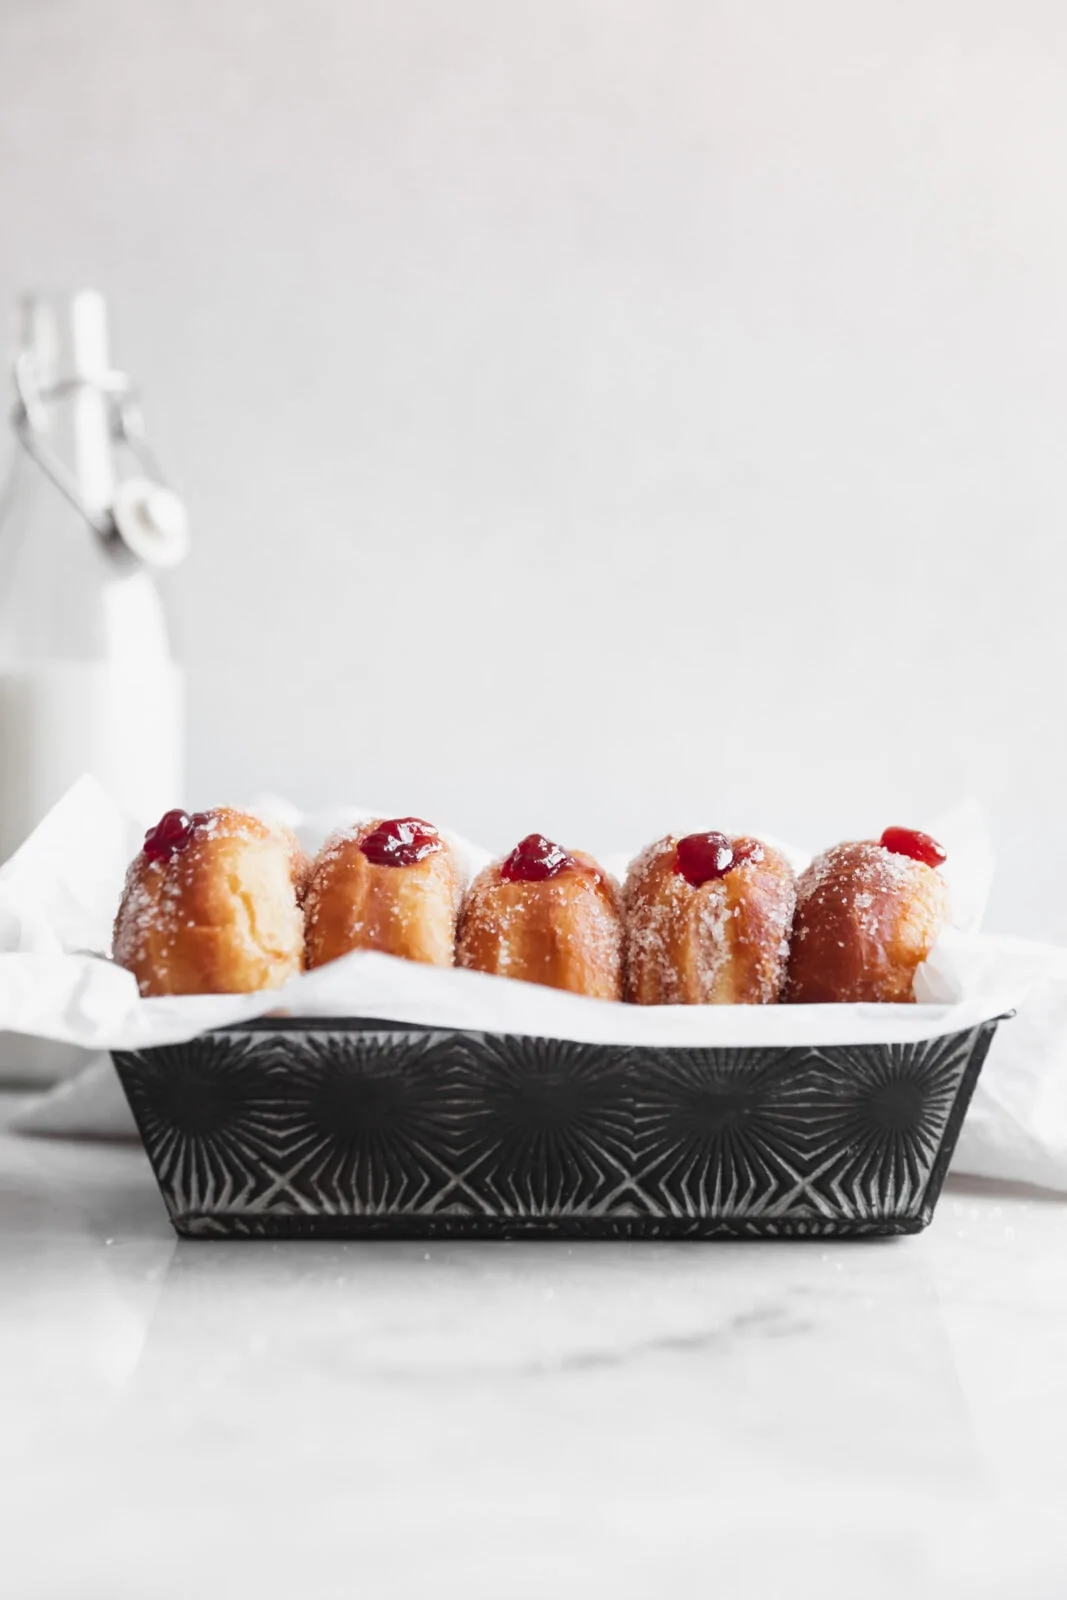 homemade jelly donuts in a pan